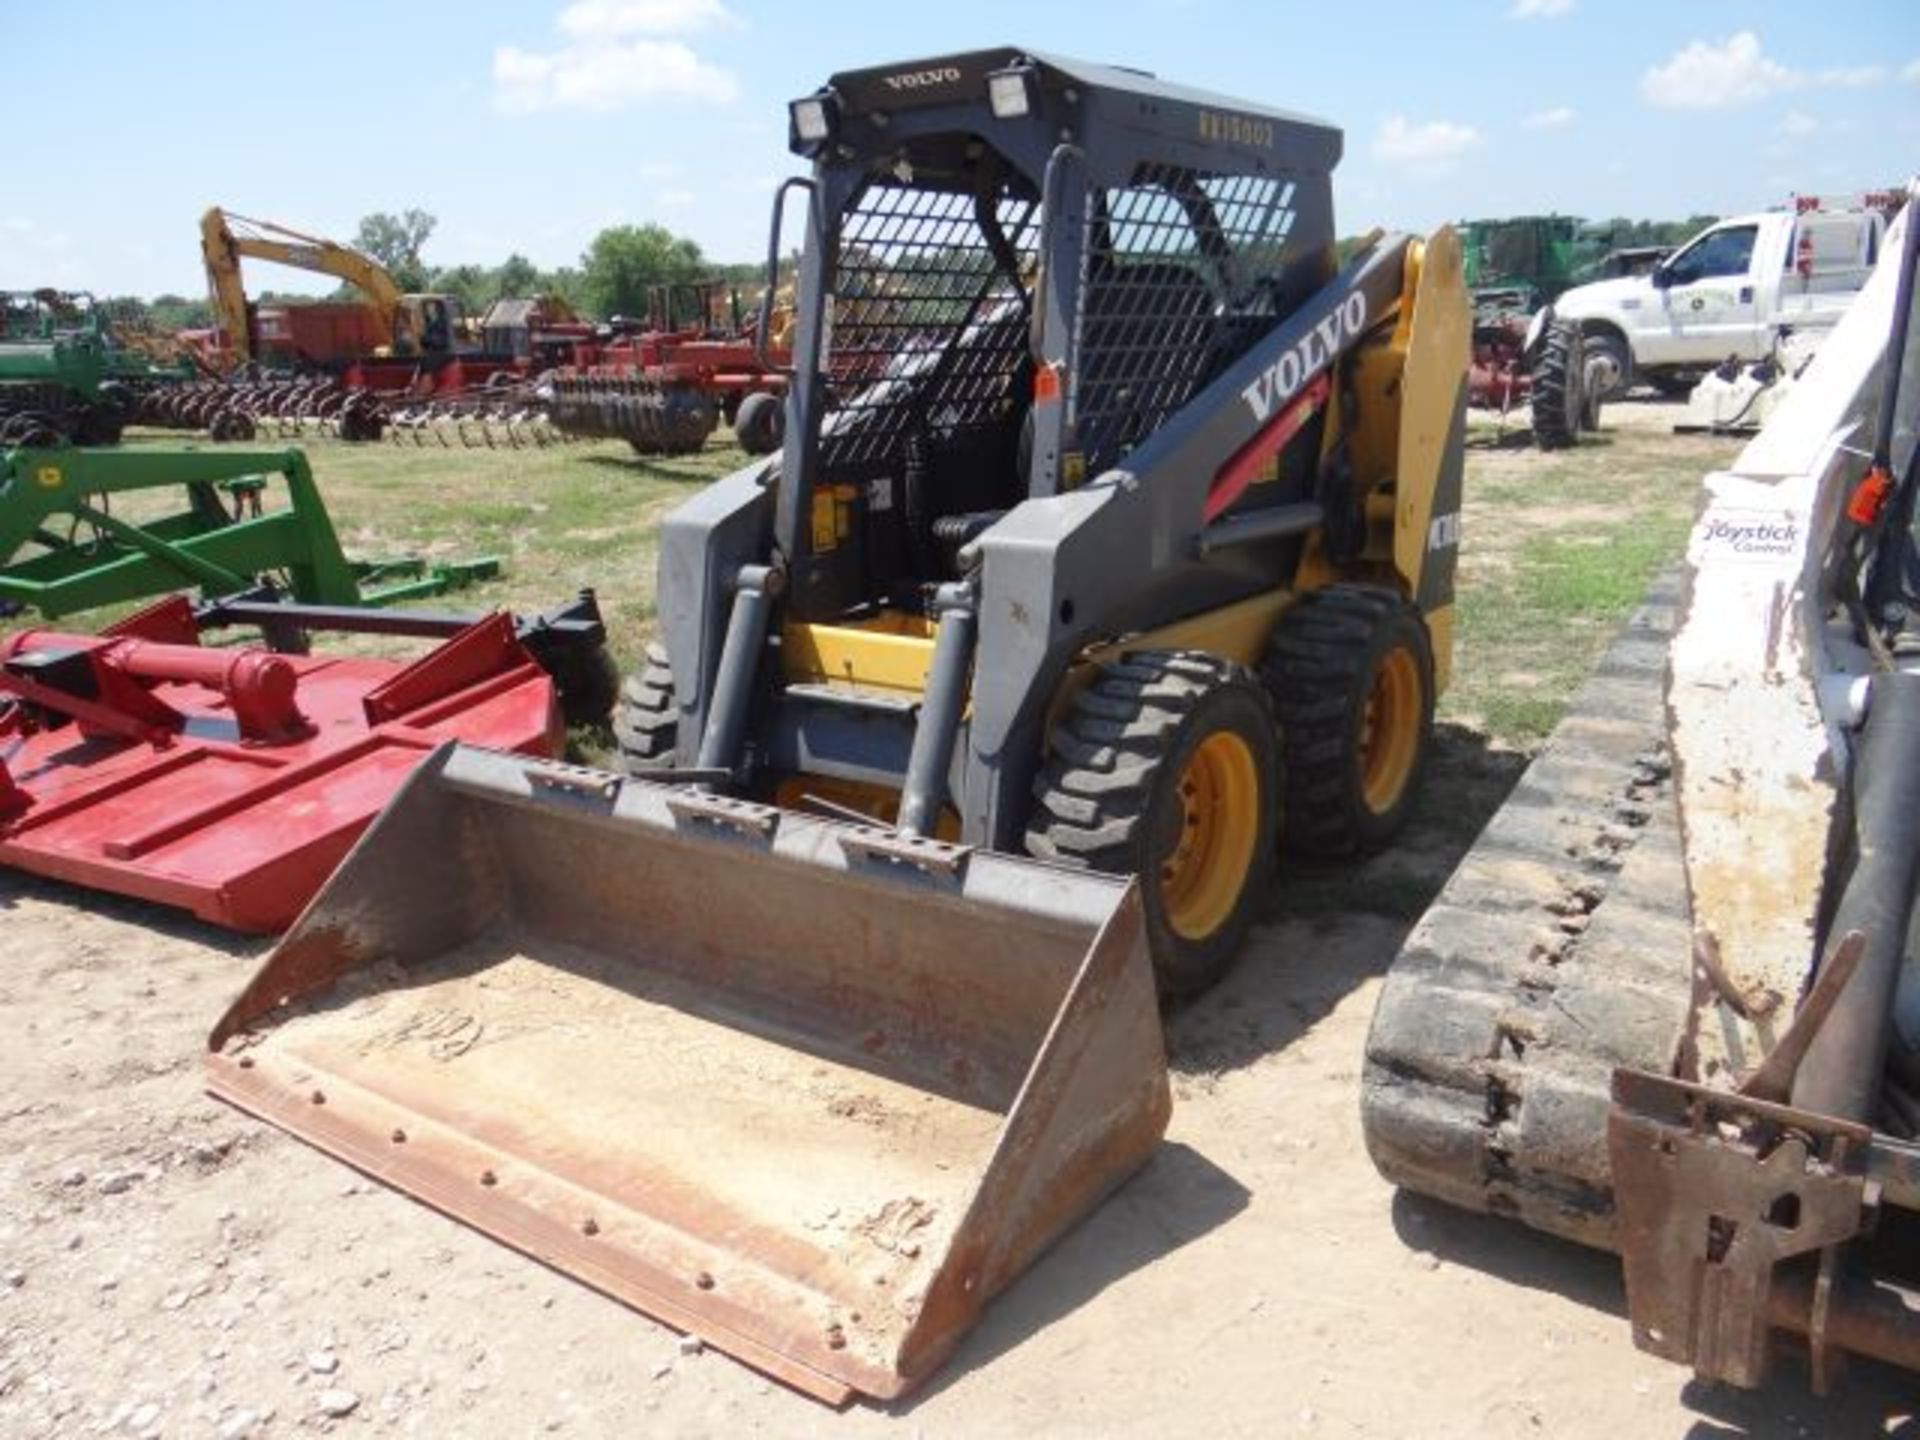 Volvo MC70B Skid Steer, 2006 #111615, 1890 hrs, 53hp, Less than 40 hrs on Tires, 72" Construction